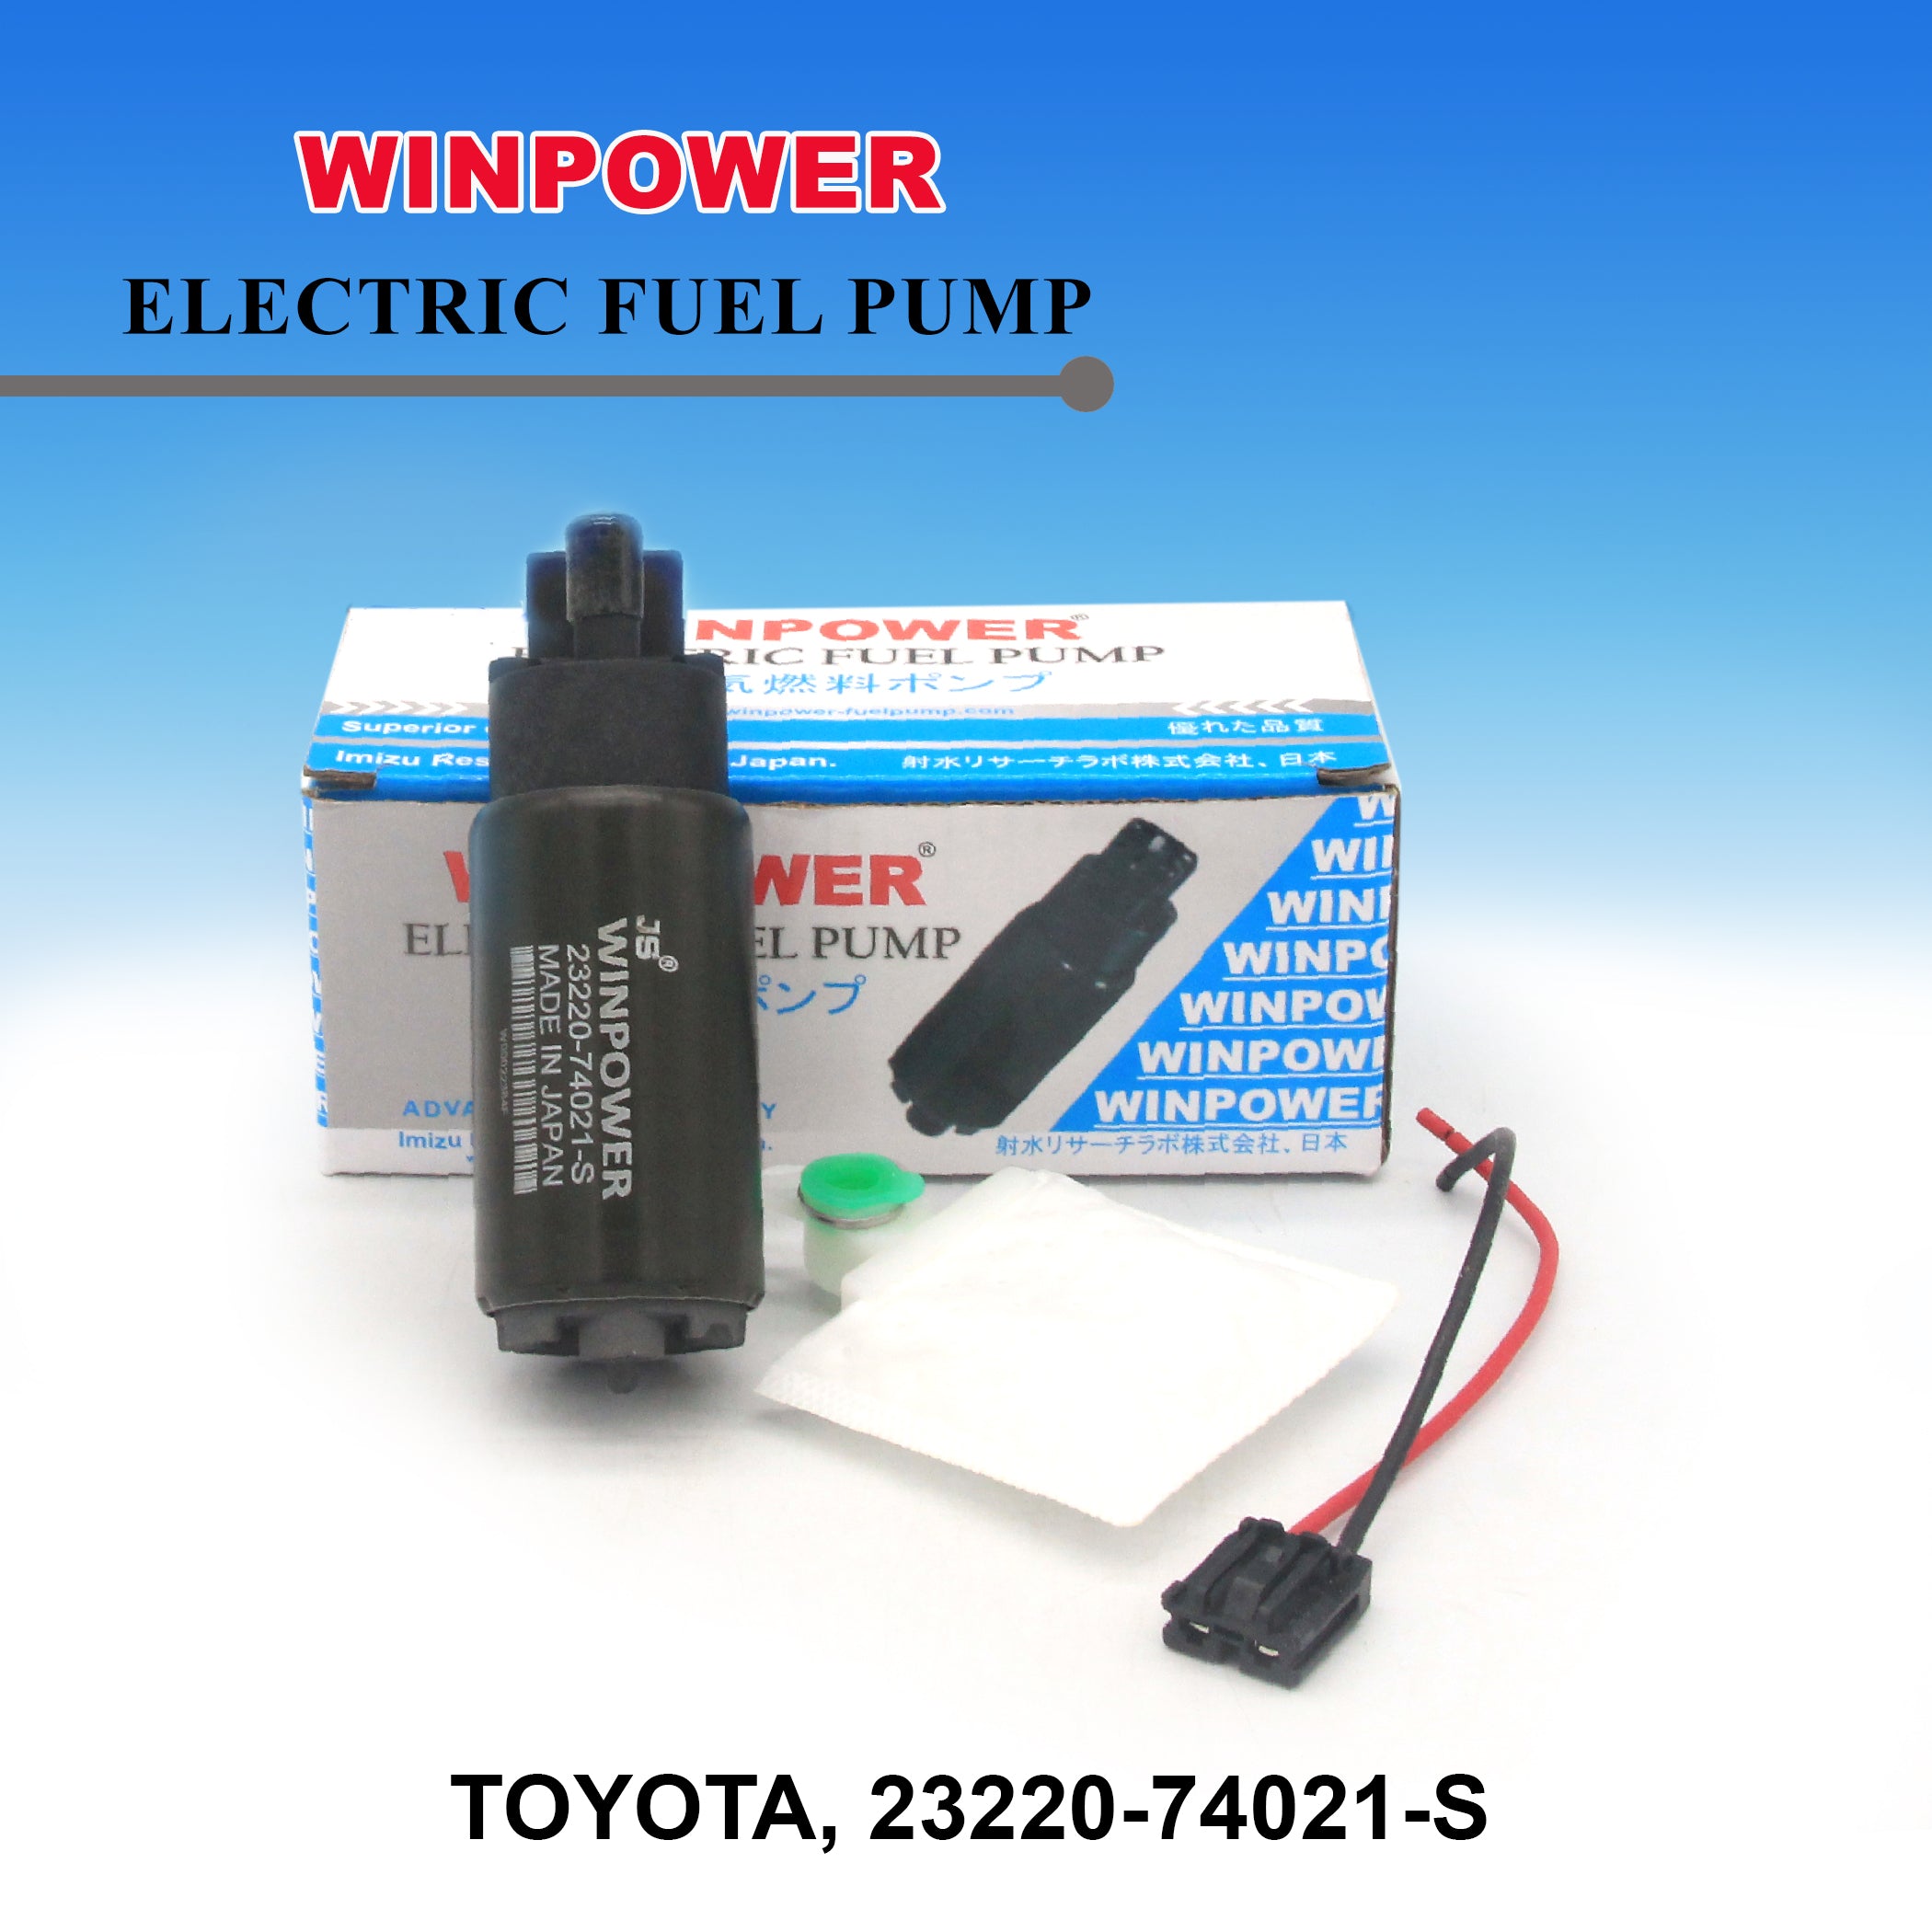 In-Tank Fuel Pump, (Small) WINPOWER, Small Pin, 23220-74021-S, WF-3801 (000877)